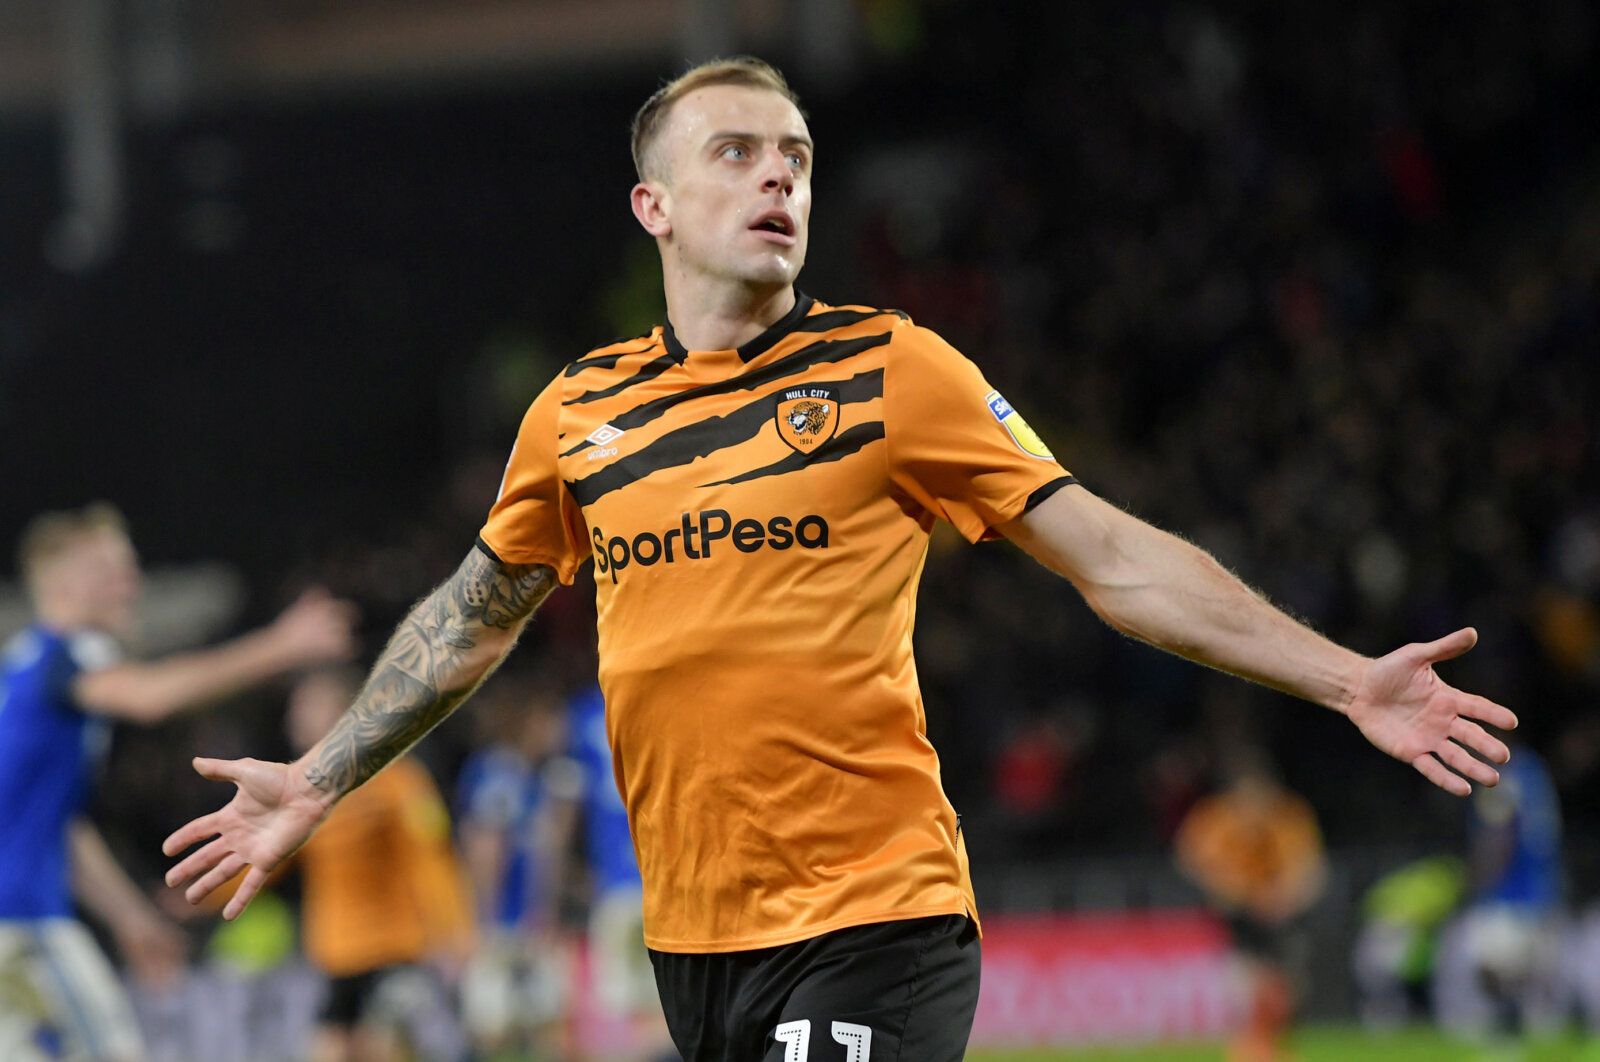 Soccer Football - Championship - Hull City v Birmingham City - KCOM Stadium, Hull, Britain - December 21, 2019   Hull City's Kamil Grosicki celebrates scoring their second goal   Action Images/Paul Burrows    EDITORIAL USE ONLY. No use with unauthorized audio, video, data, fixture lists, club/league logos or 